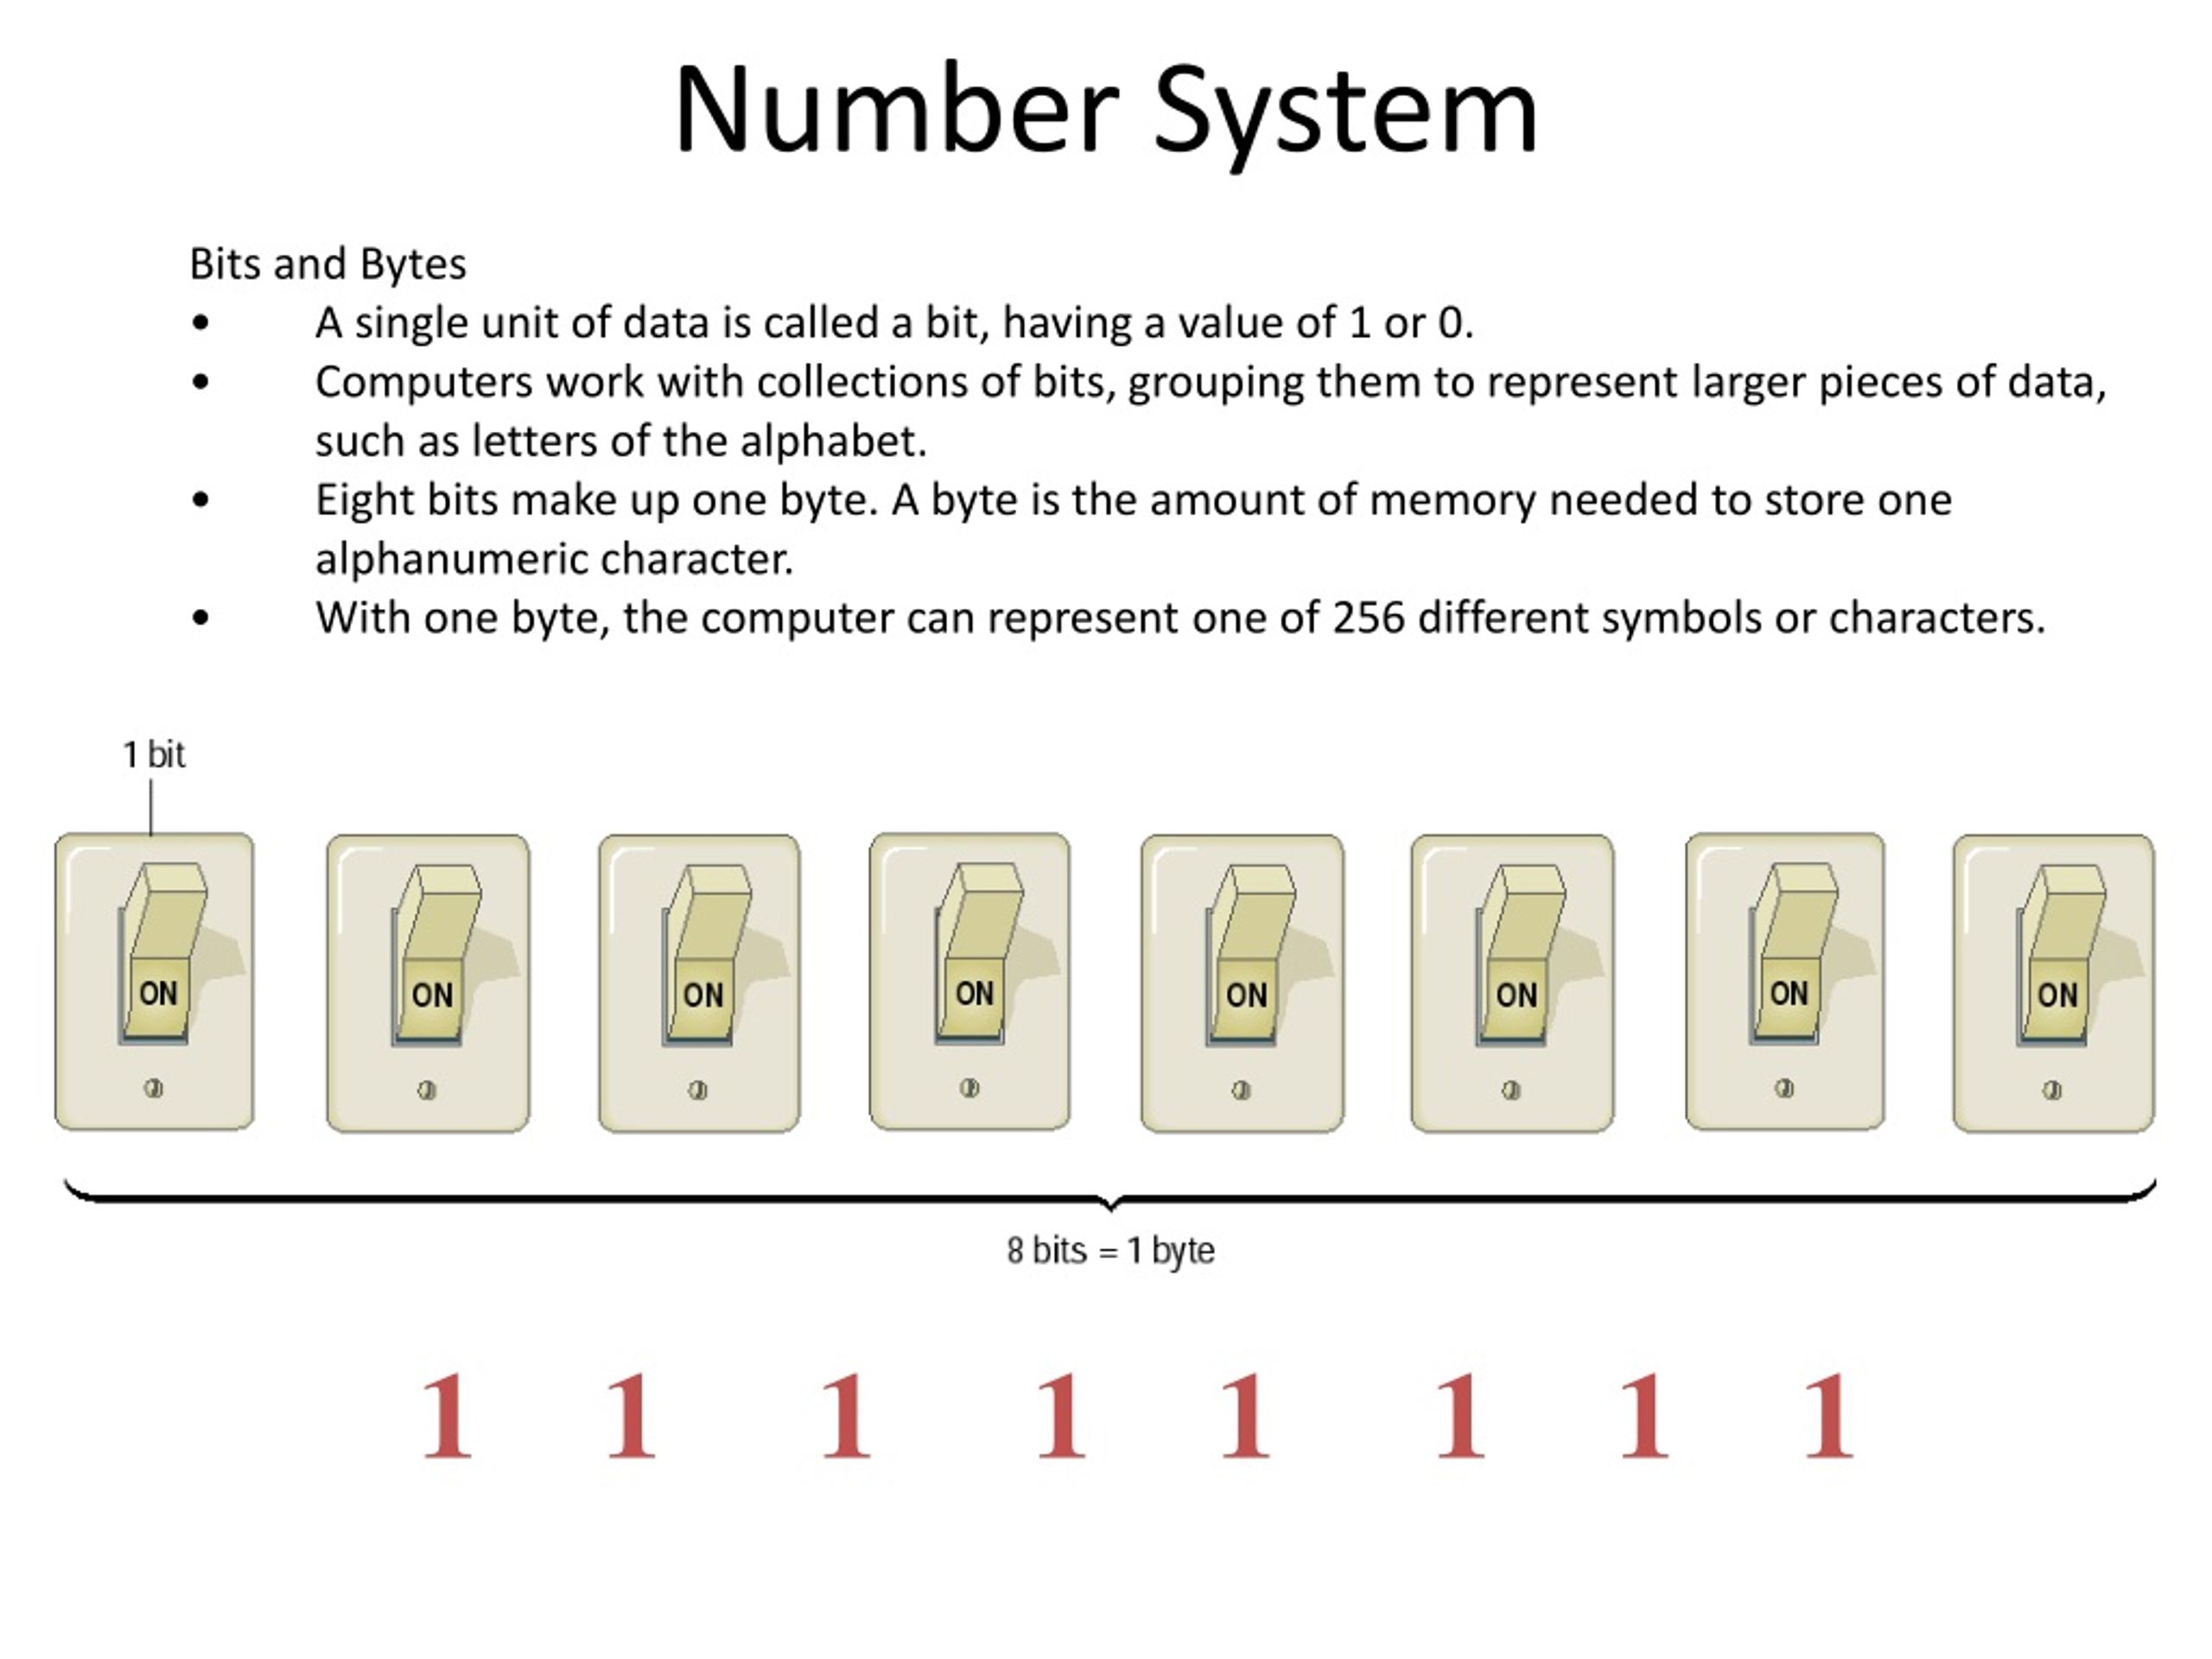 ppt-lecture-3-computer-number-system-powerpoint-presentation-free-download-id-8967881